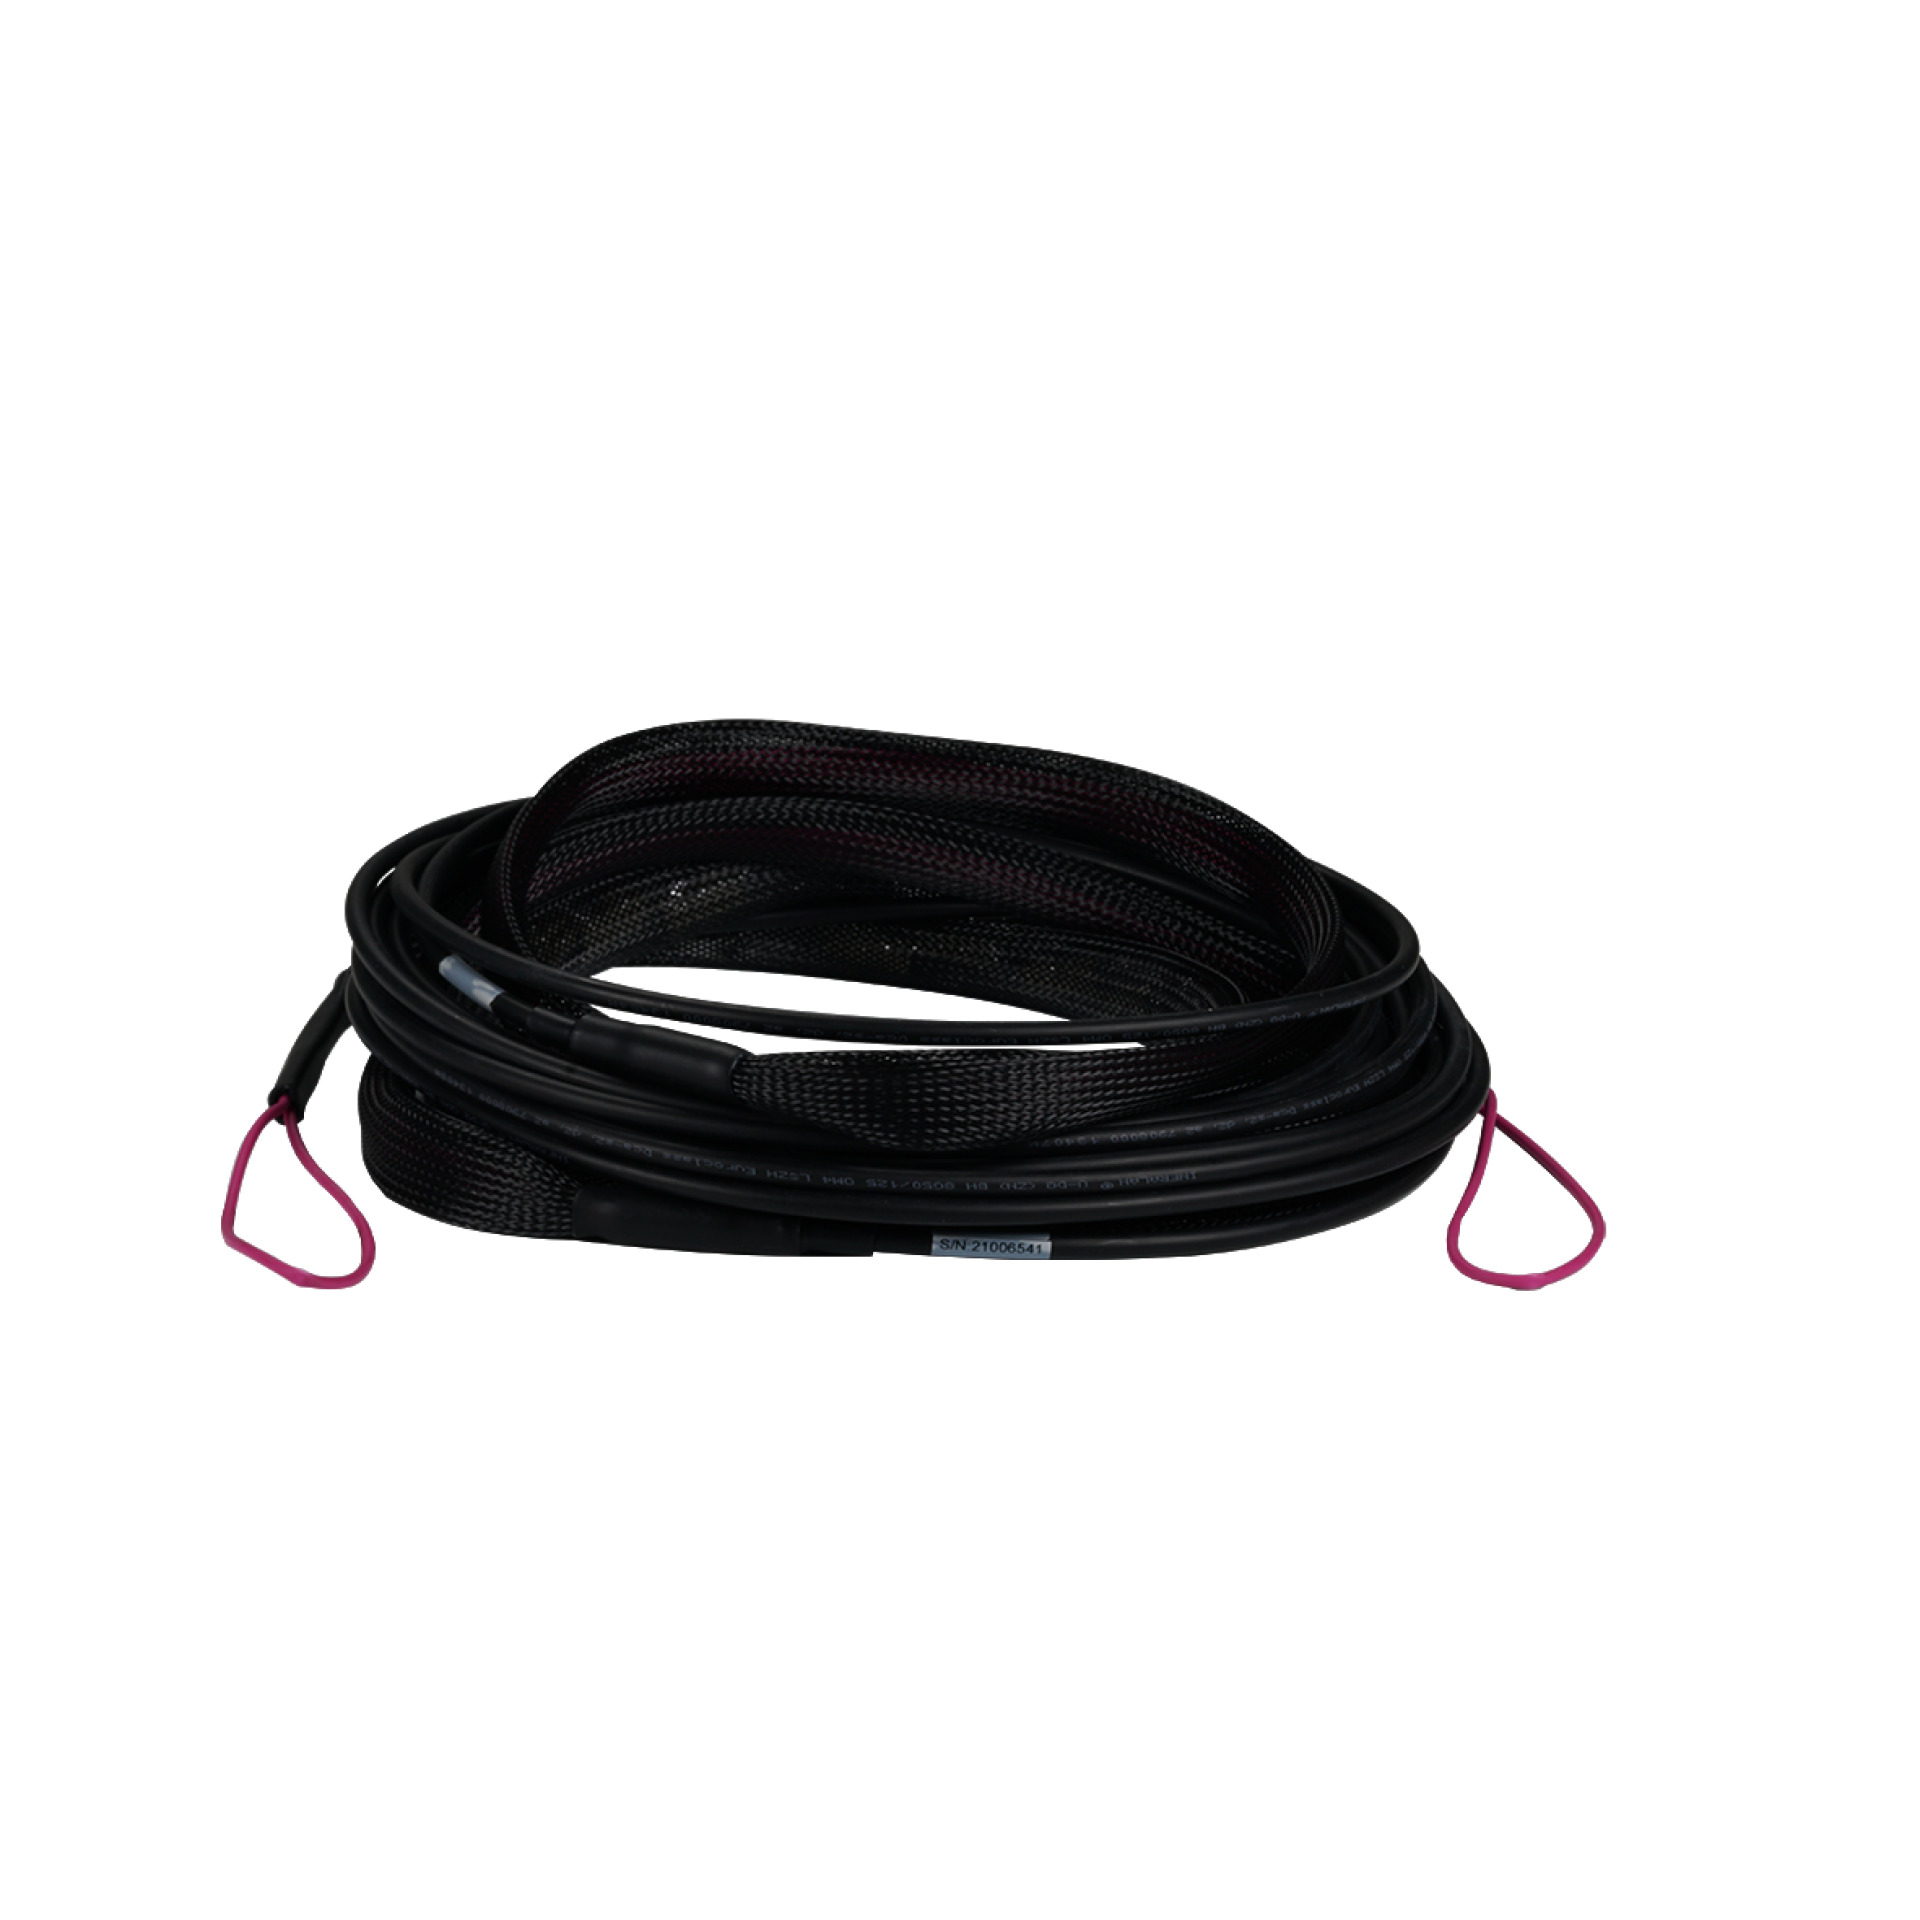 Trunk cable U-DQ(ZN)BH 4G 50/125, SC/SC OM4 180m